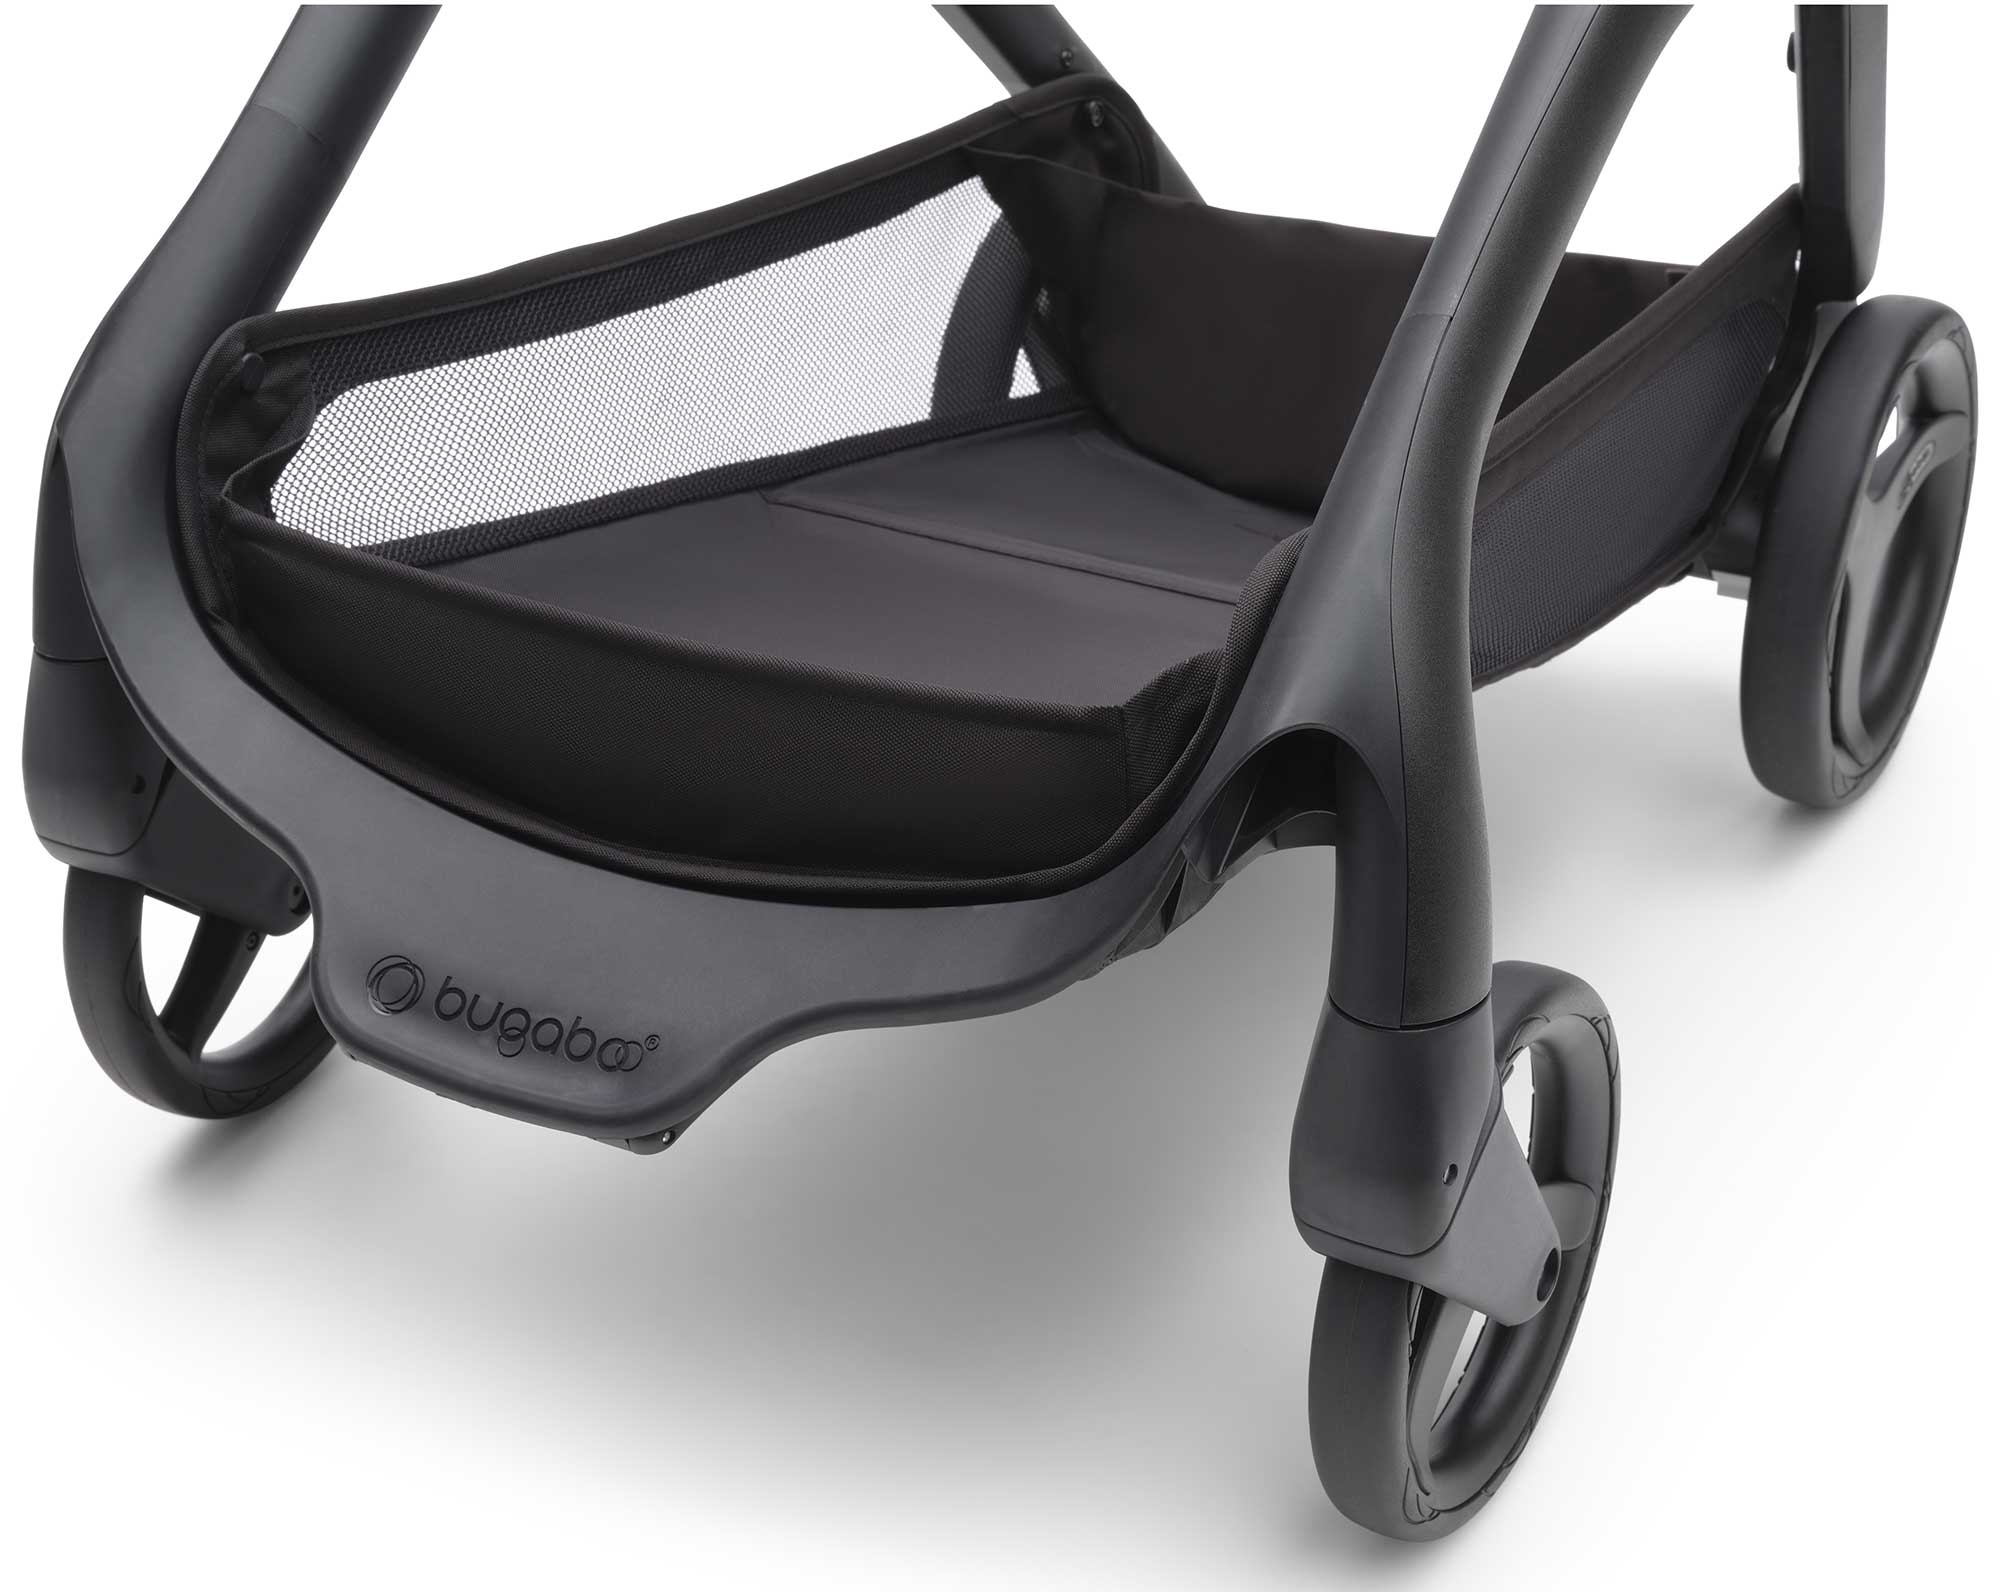 Bugaboo Travel Systems Bugaboo Dragonfly Ultimate Bundle - Black/Forest Green 13810-BLK-FOR-GRN